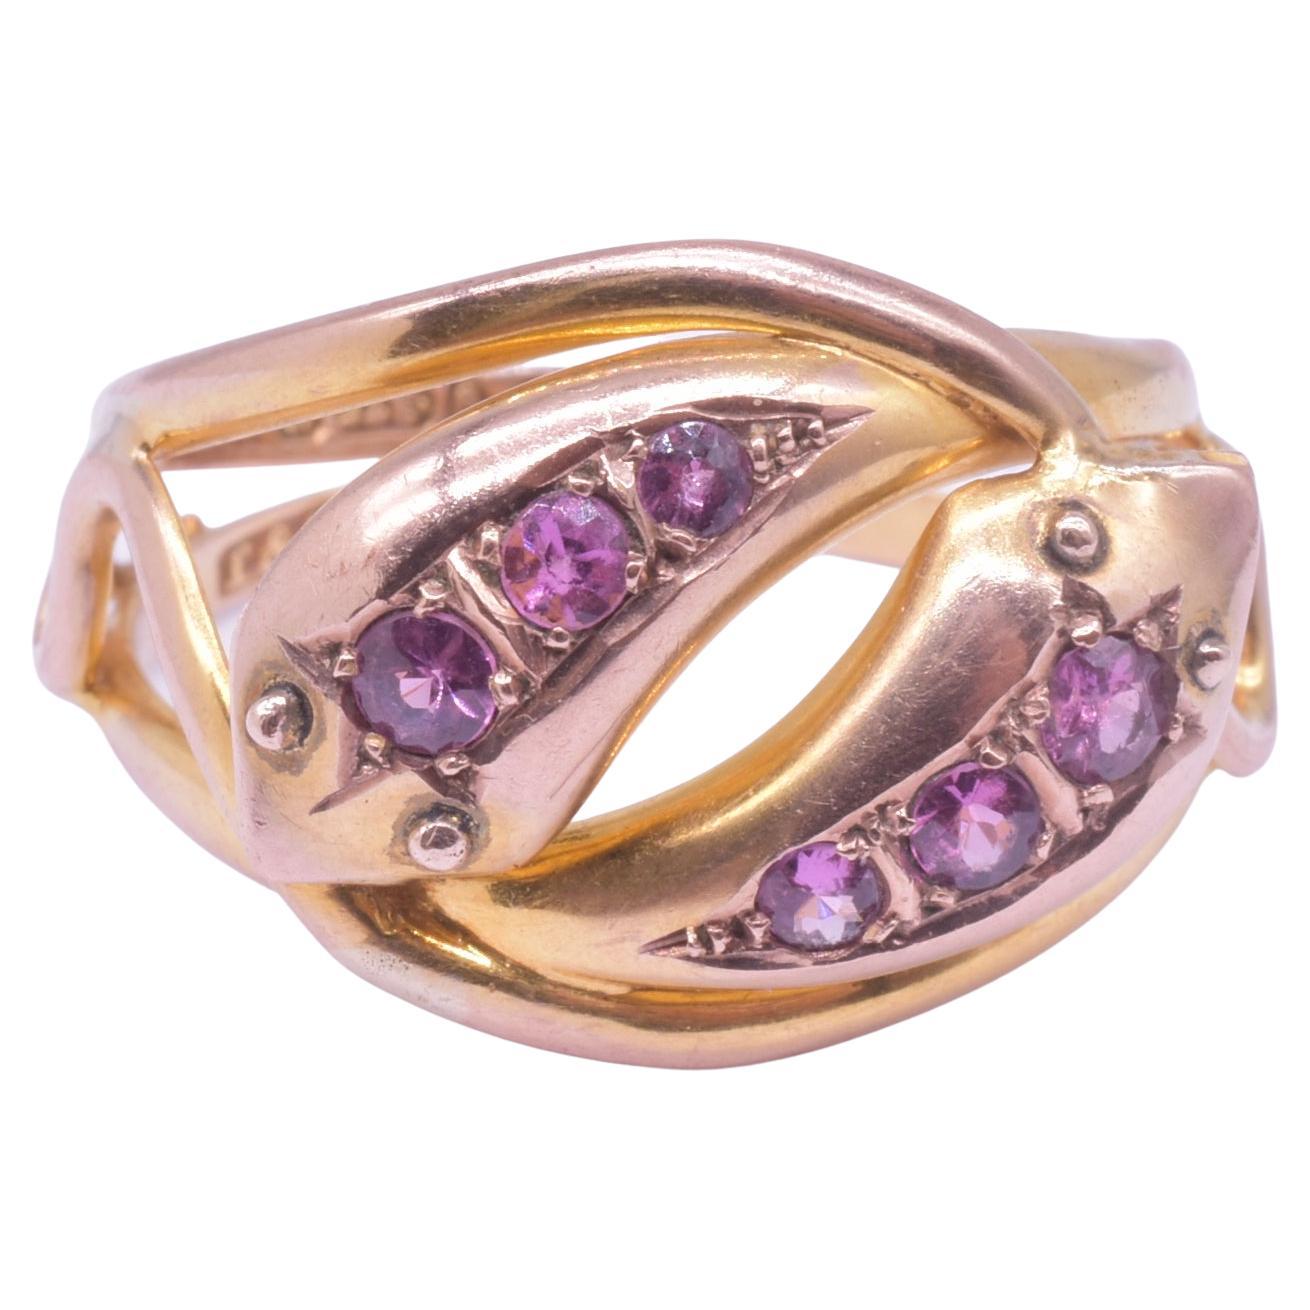 Hallmarked 1911 Chester 9K Double Snake Ring with 6 Pink Sapphire Gemstones